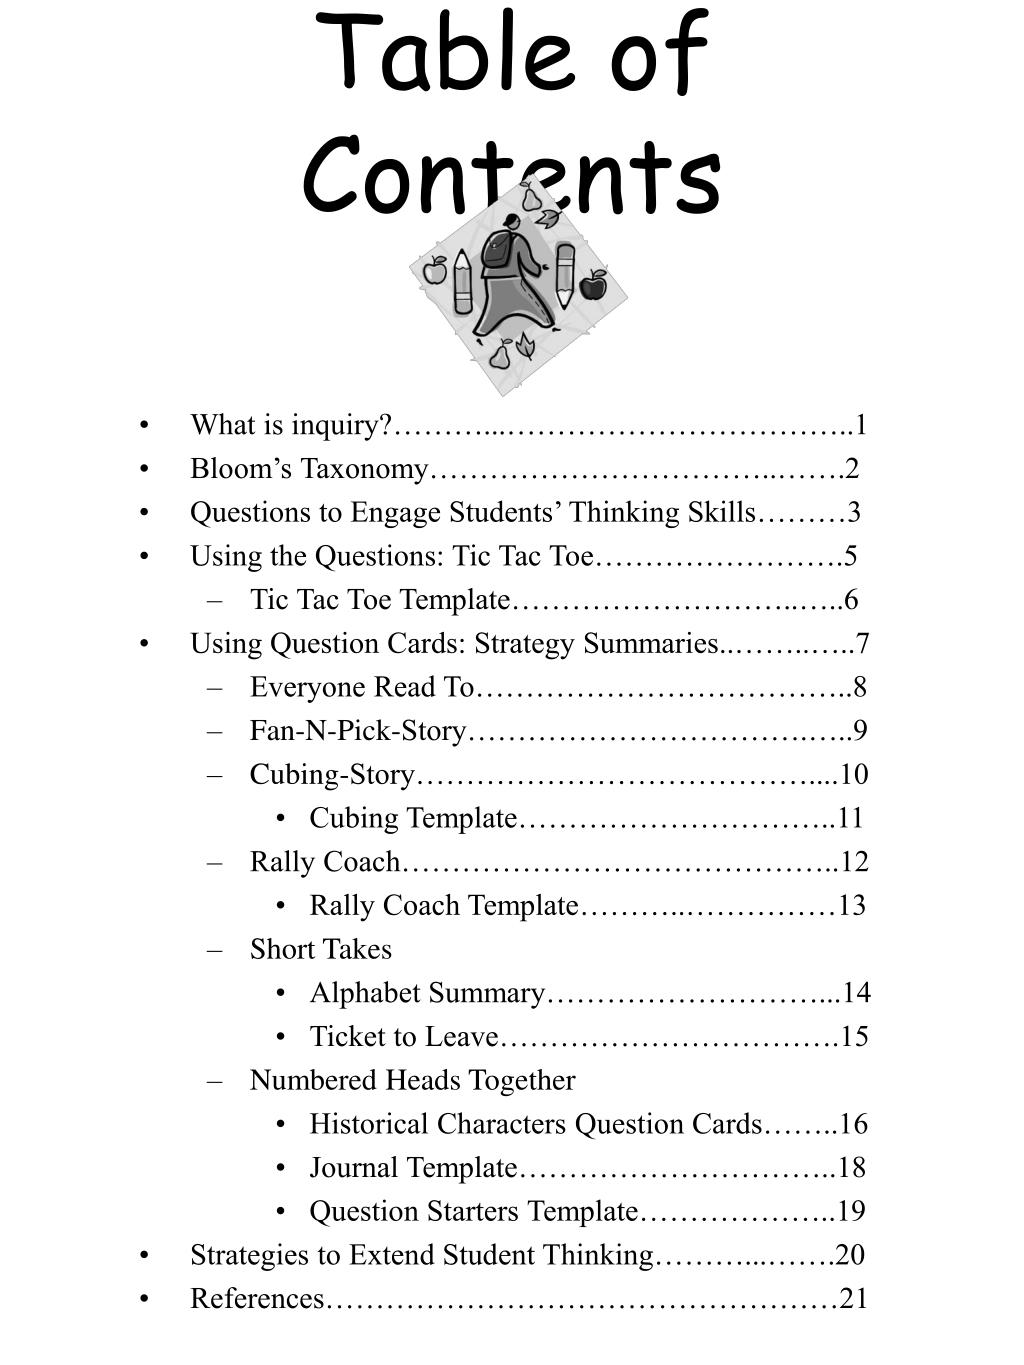 table of contents sample for assignment